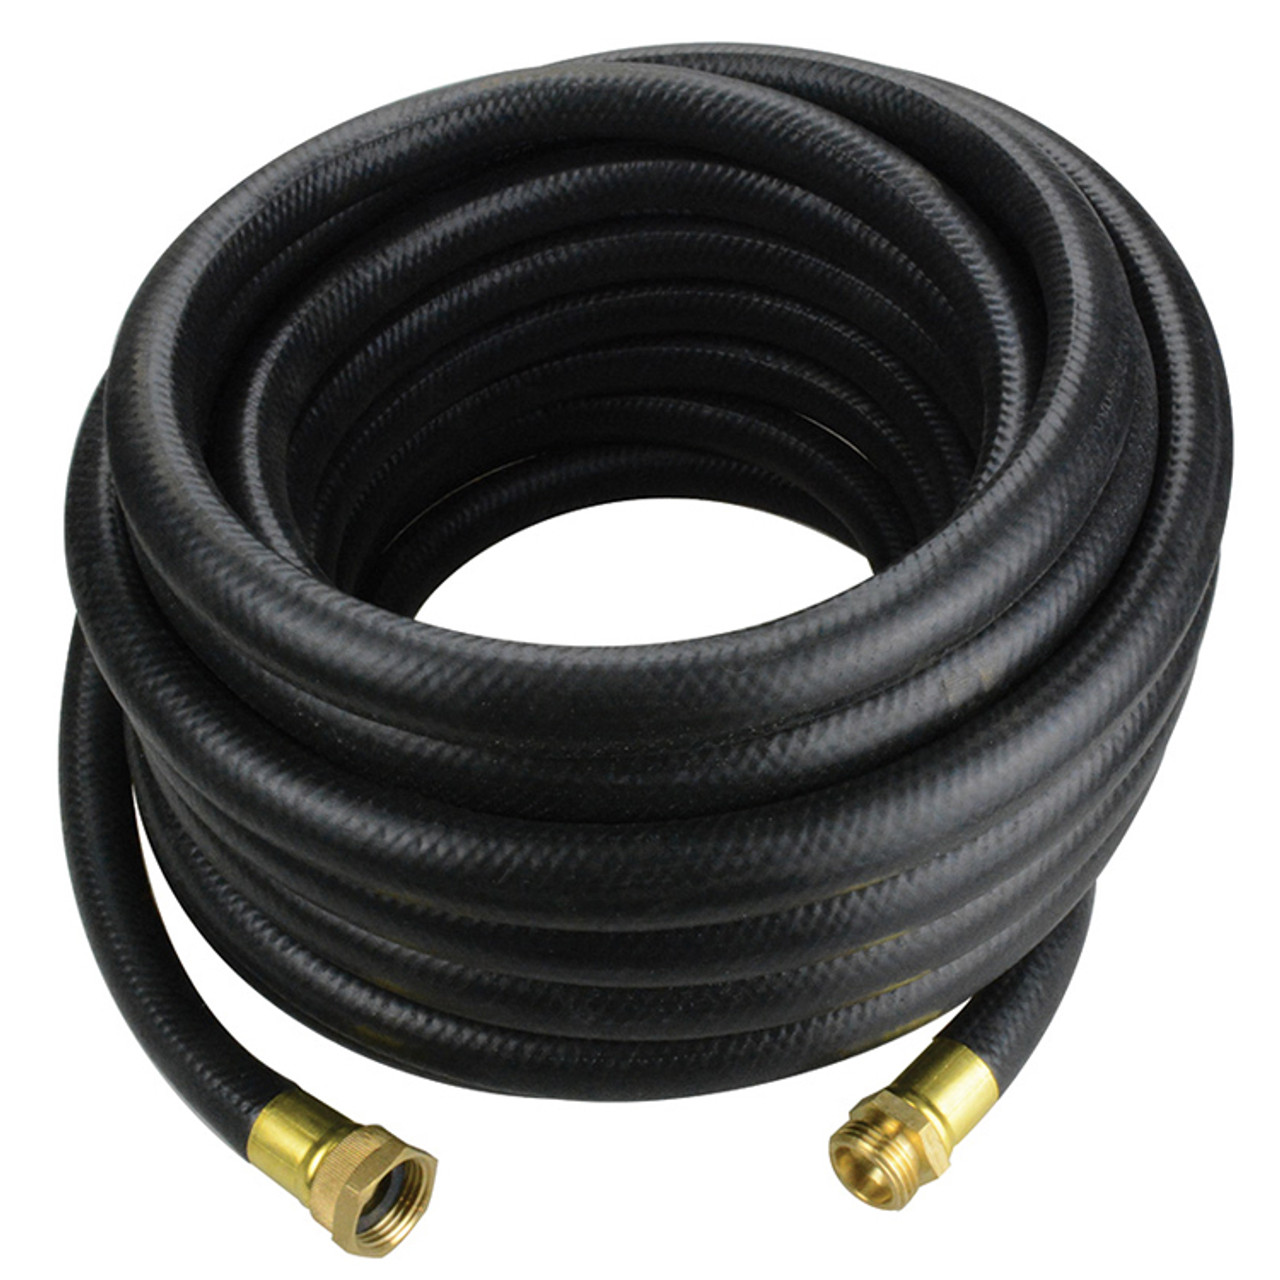 1/2" x 50' Industrial Water Hose Assembly   G311-050GHT50